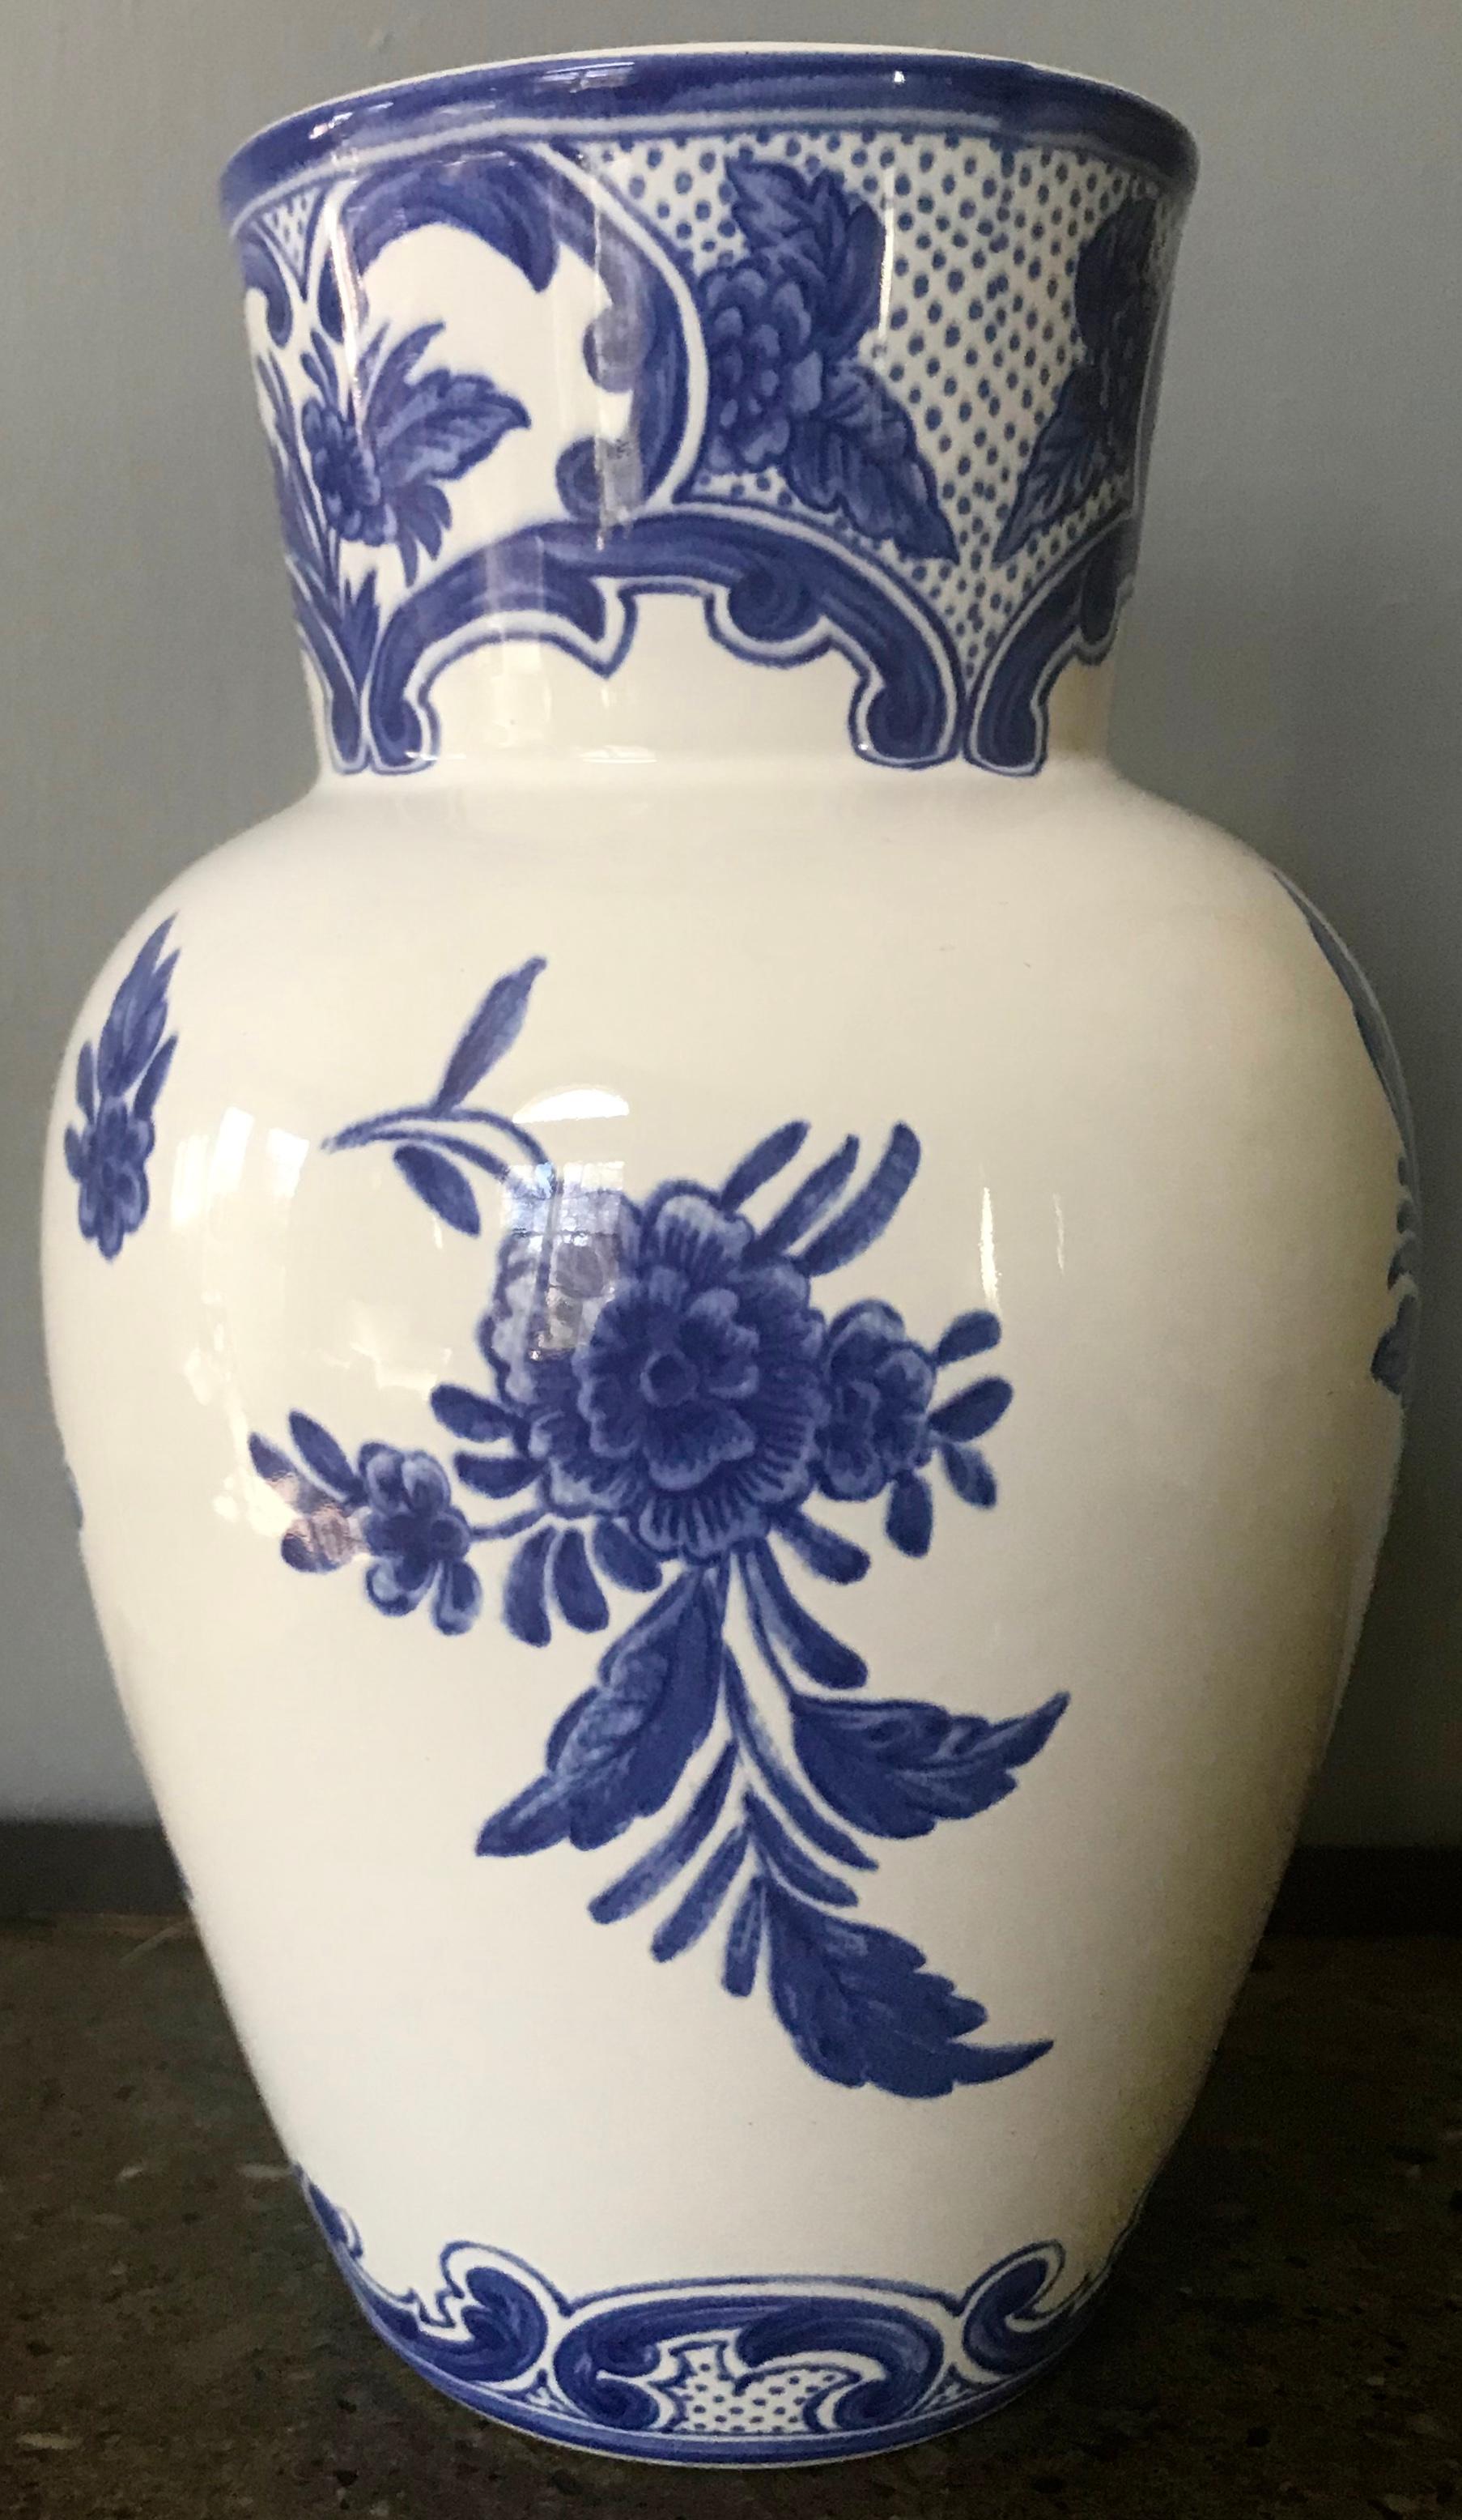 Blue and white Delft Tiffany & Co. vase. Tall glazed white and blue pottery collared vase with floral sprigs and Delft style decorations. Made for Tiffany & Co. Portugal, 1996.
Dimensions: 4